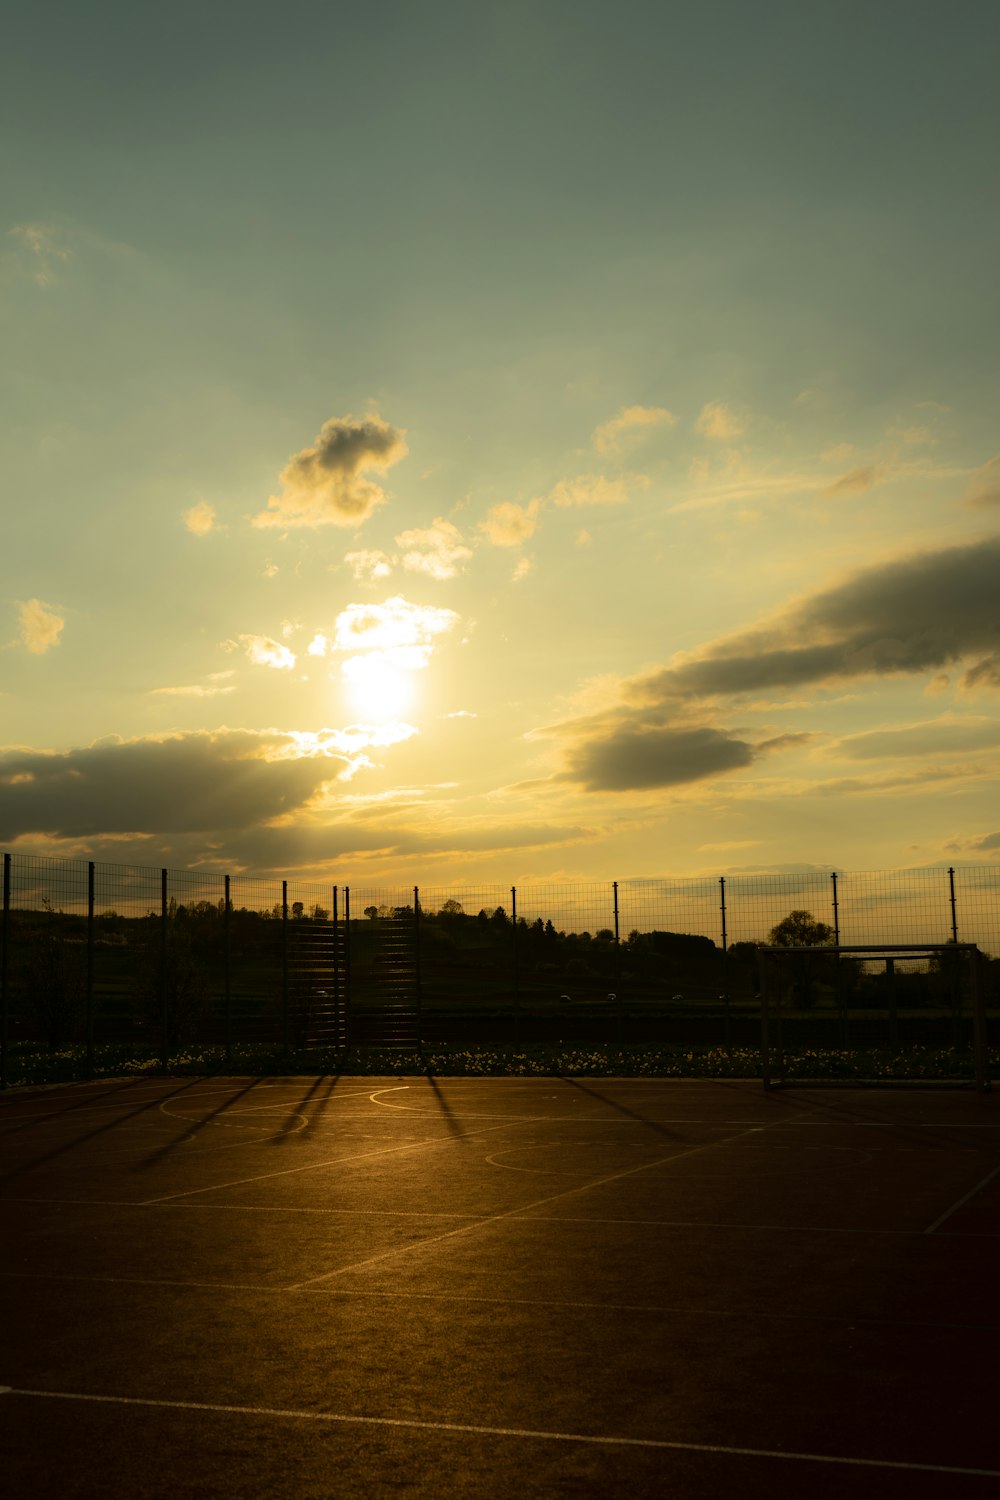 a tennis court with a fence and a sunset